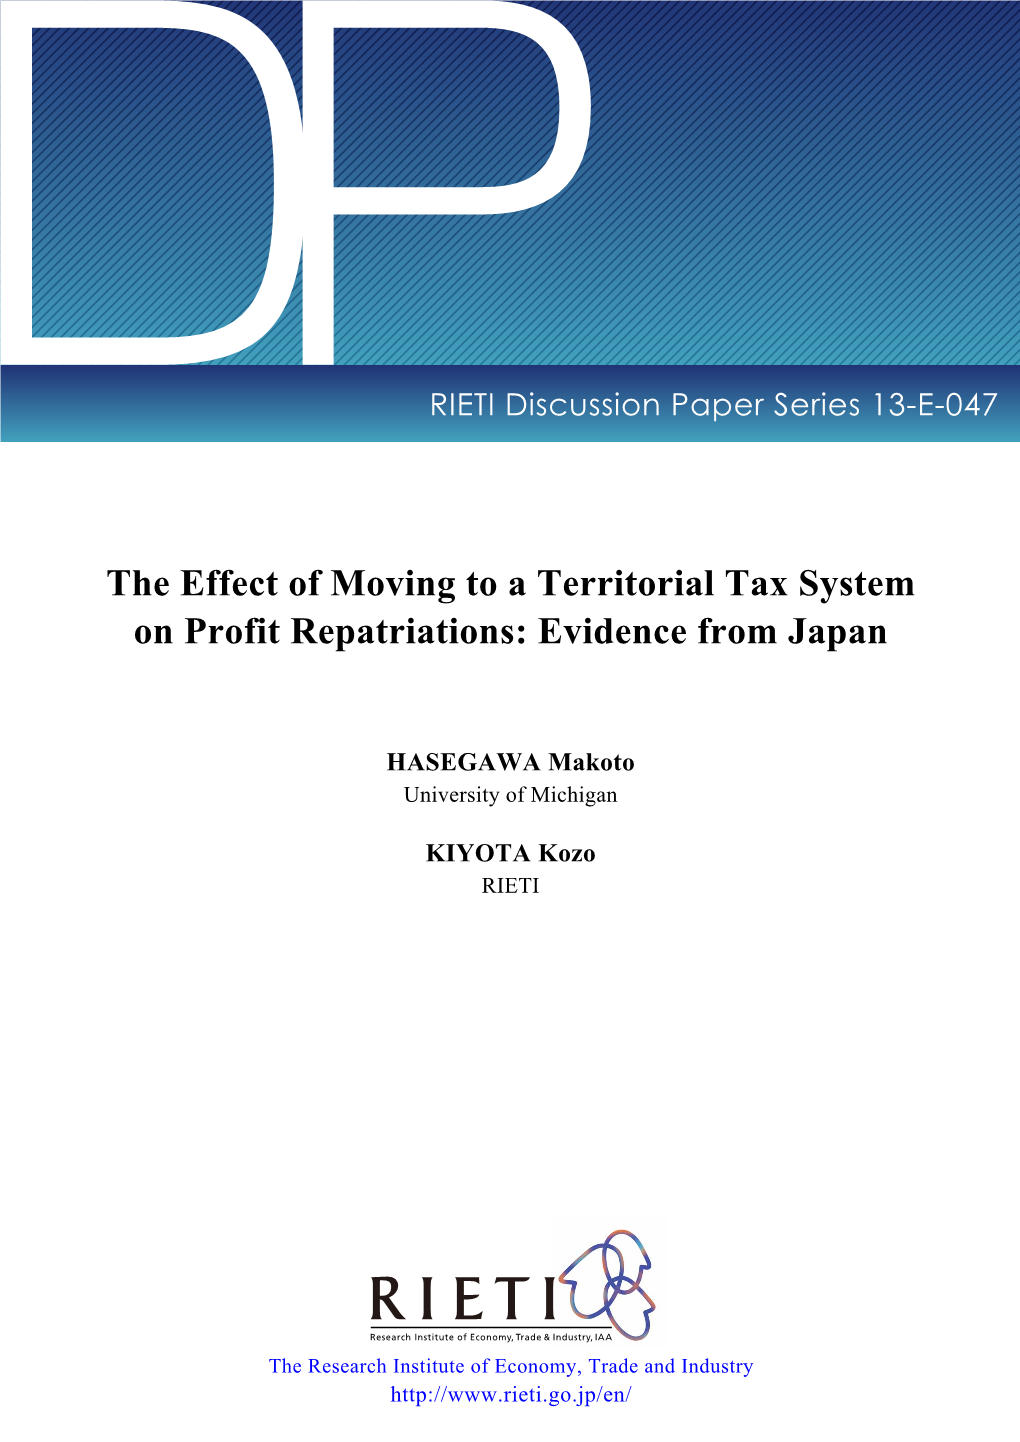 The Effect of Moving to a Territorial Tax System on Profit Repatriations: Evidence from Japan